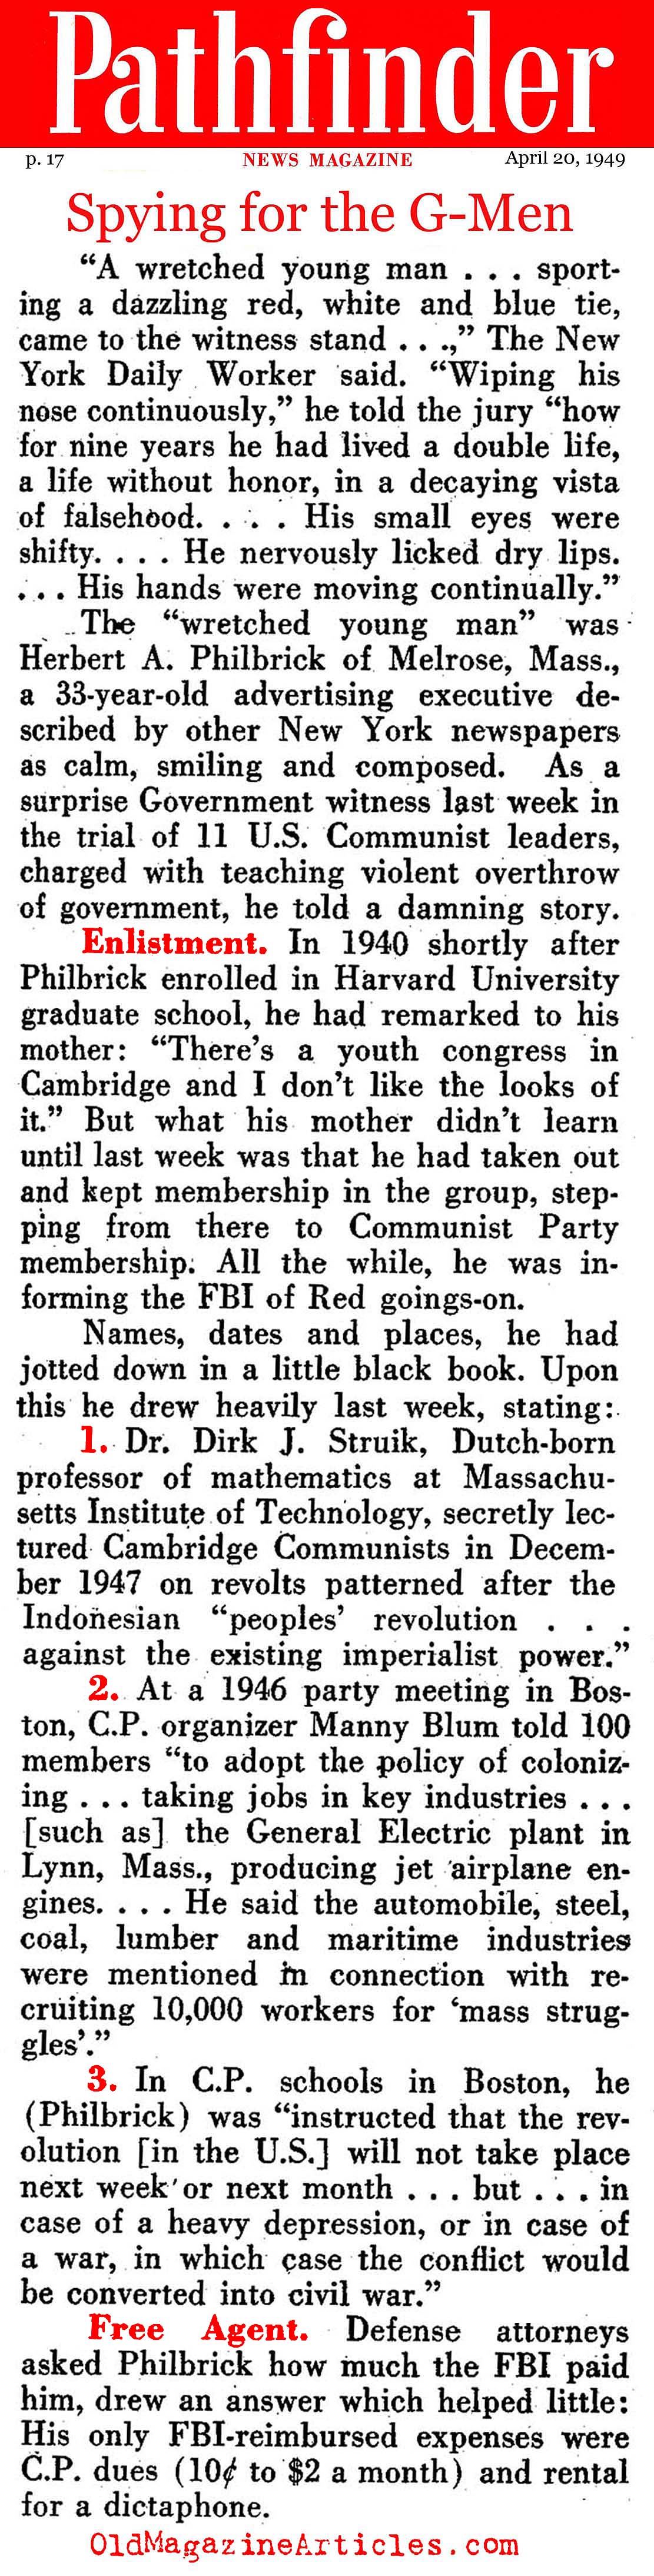 A Spy Within the CPUSA (Pathfinder Magazine, 1949)